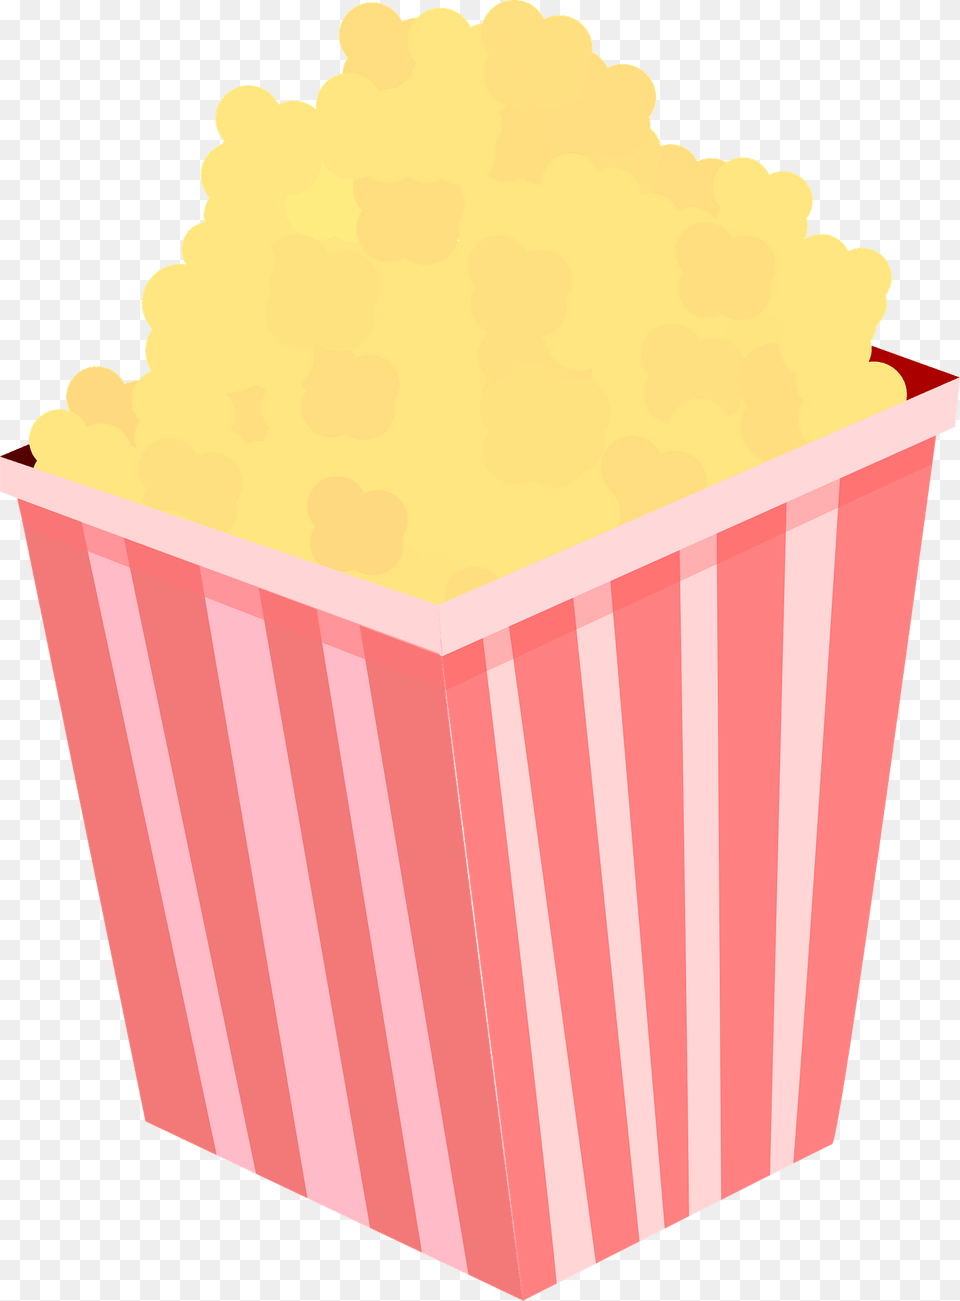 Popcorn In A Red And White Striped Carton Clipart, Food, Snack Free Png Download